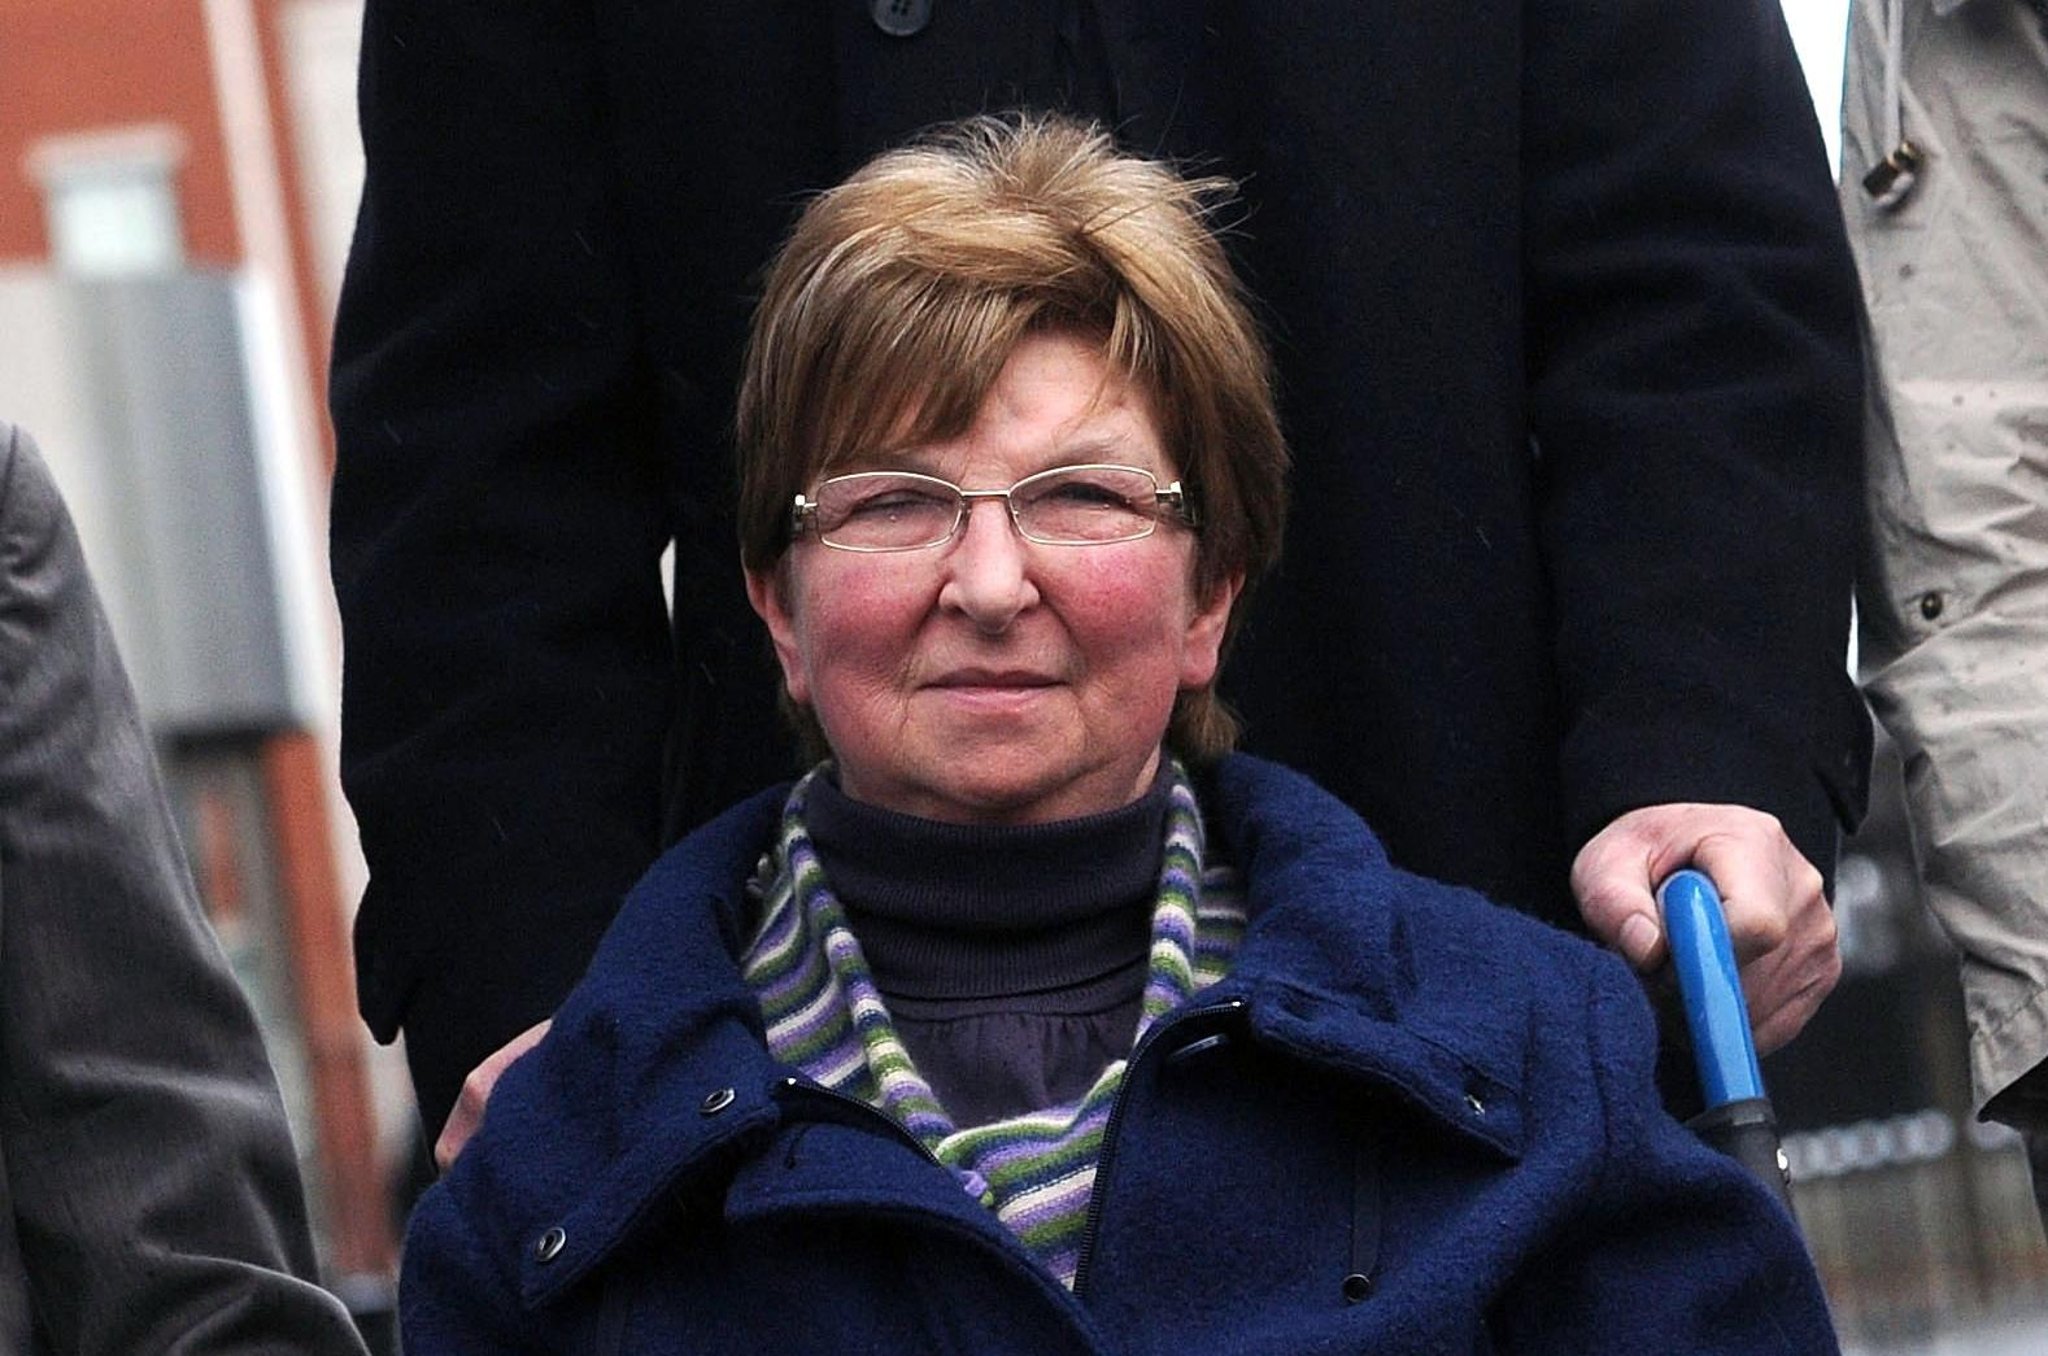 Funeral details for Patricia Cardy, a woman who showed true faith after daughter's murder